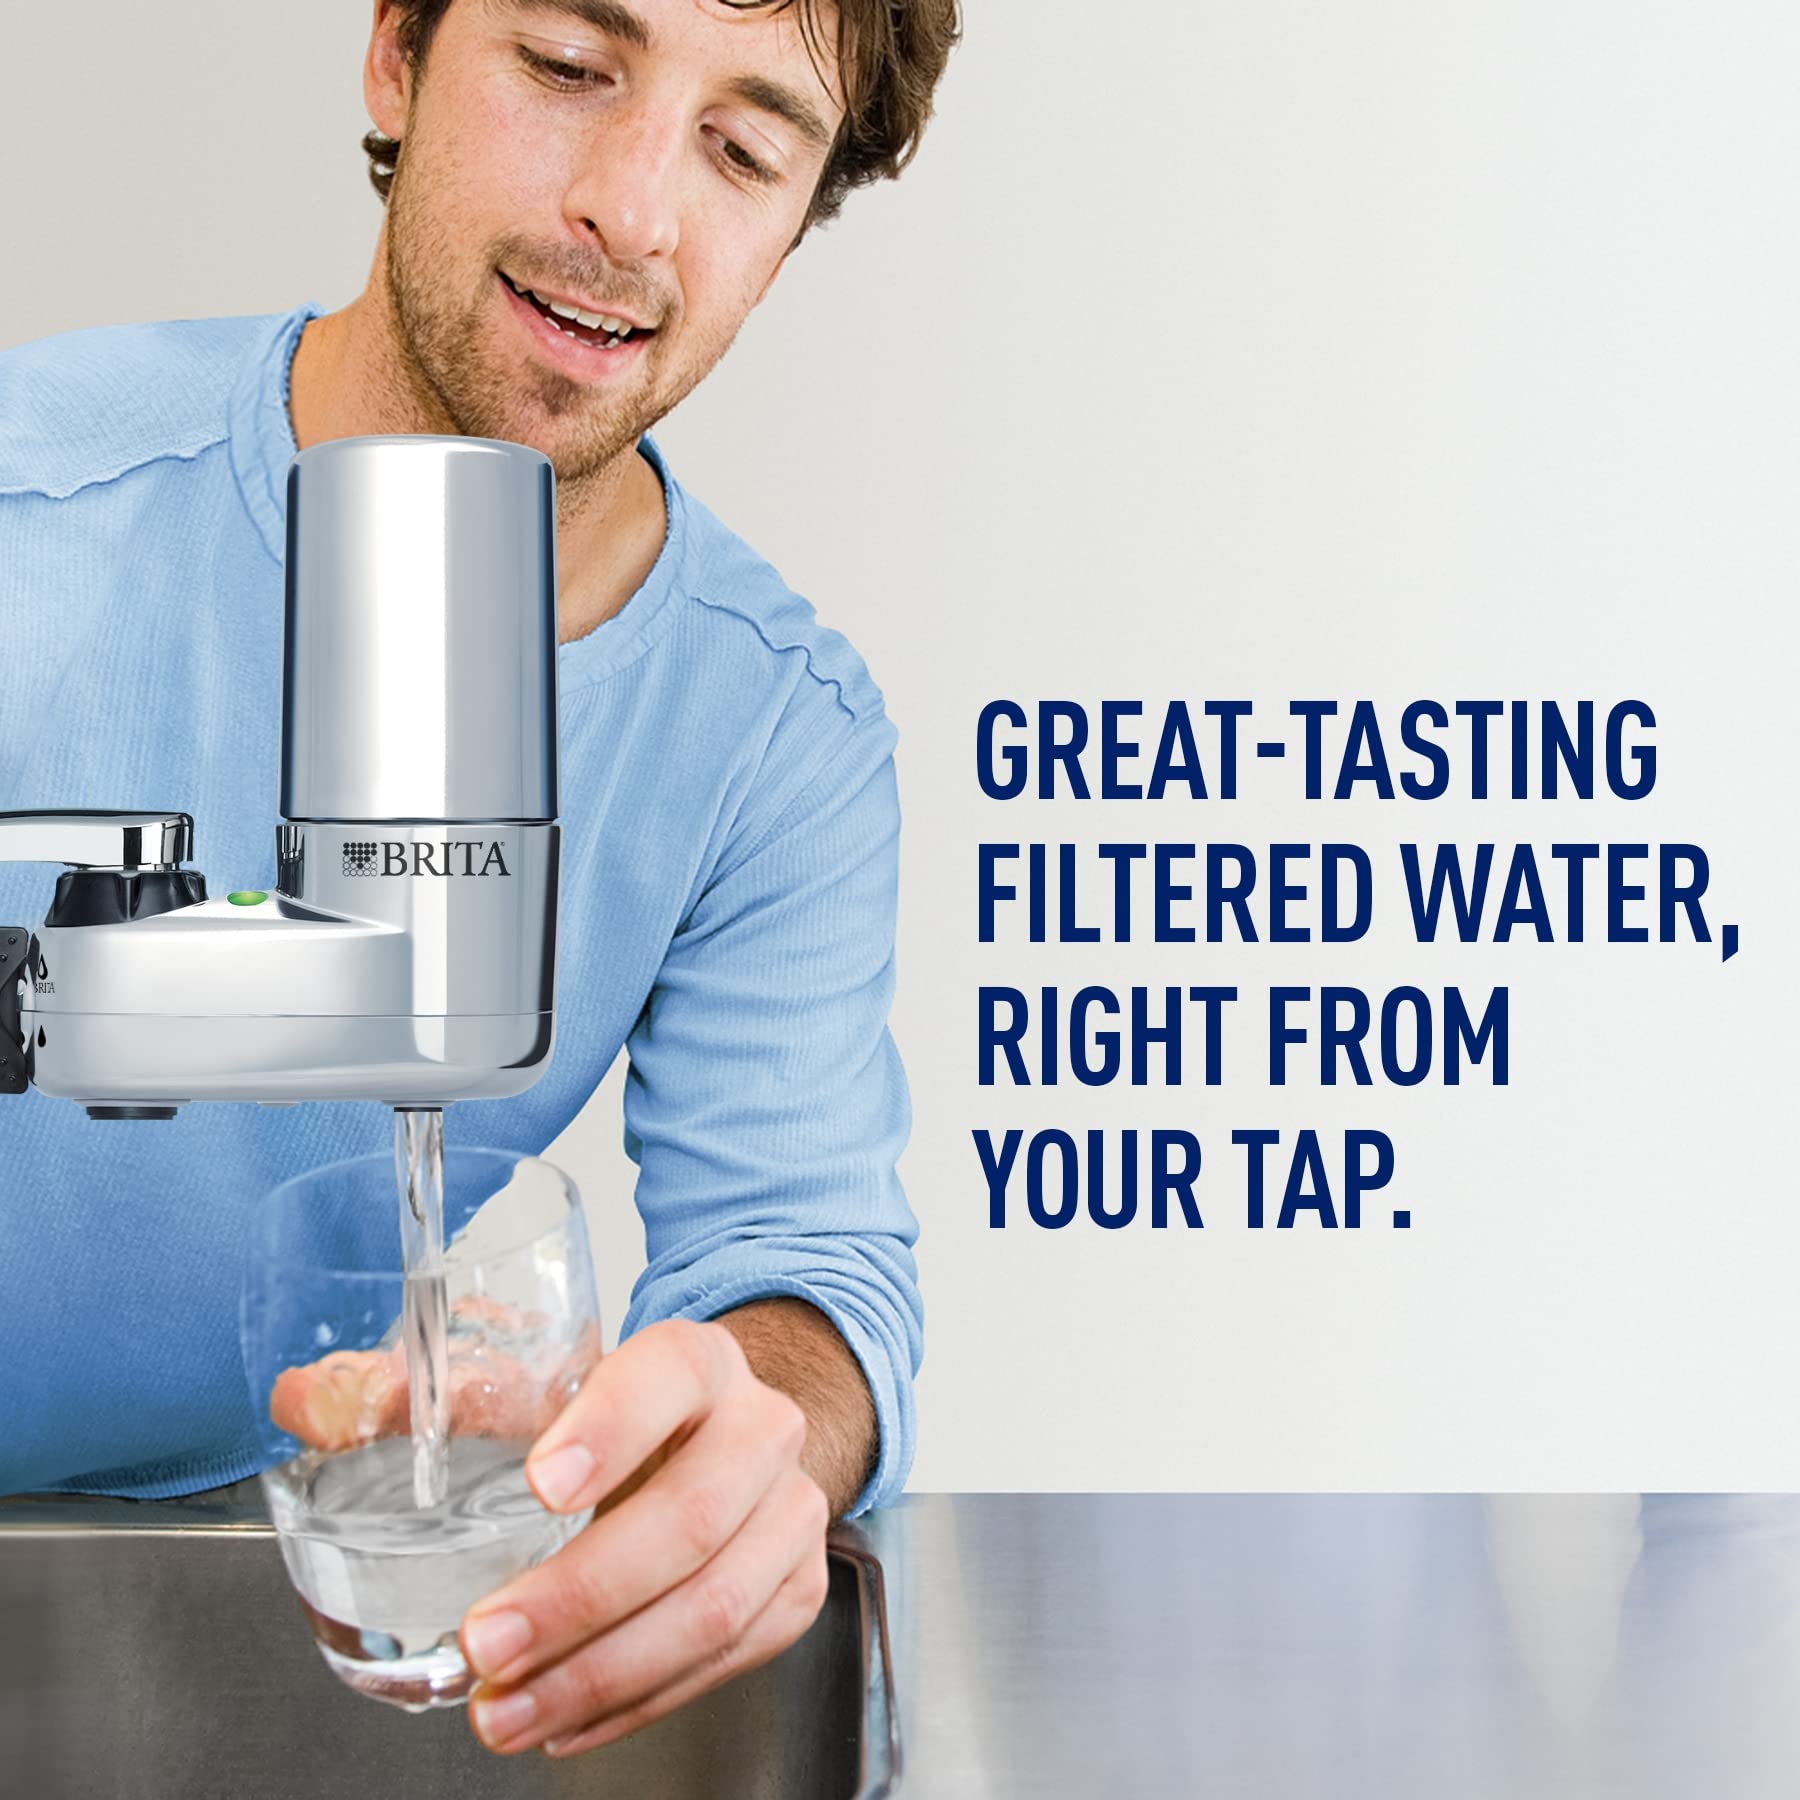 Brita Water Filter for Sink, Faucet Mount Water Filtration System for Tap Water with 3 Replacement Filters, Reduces 99% of Lead, Chrome